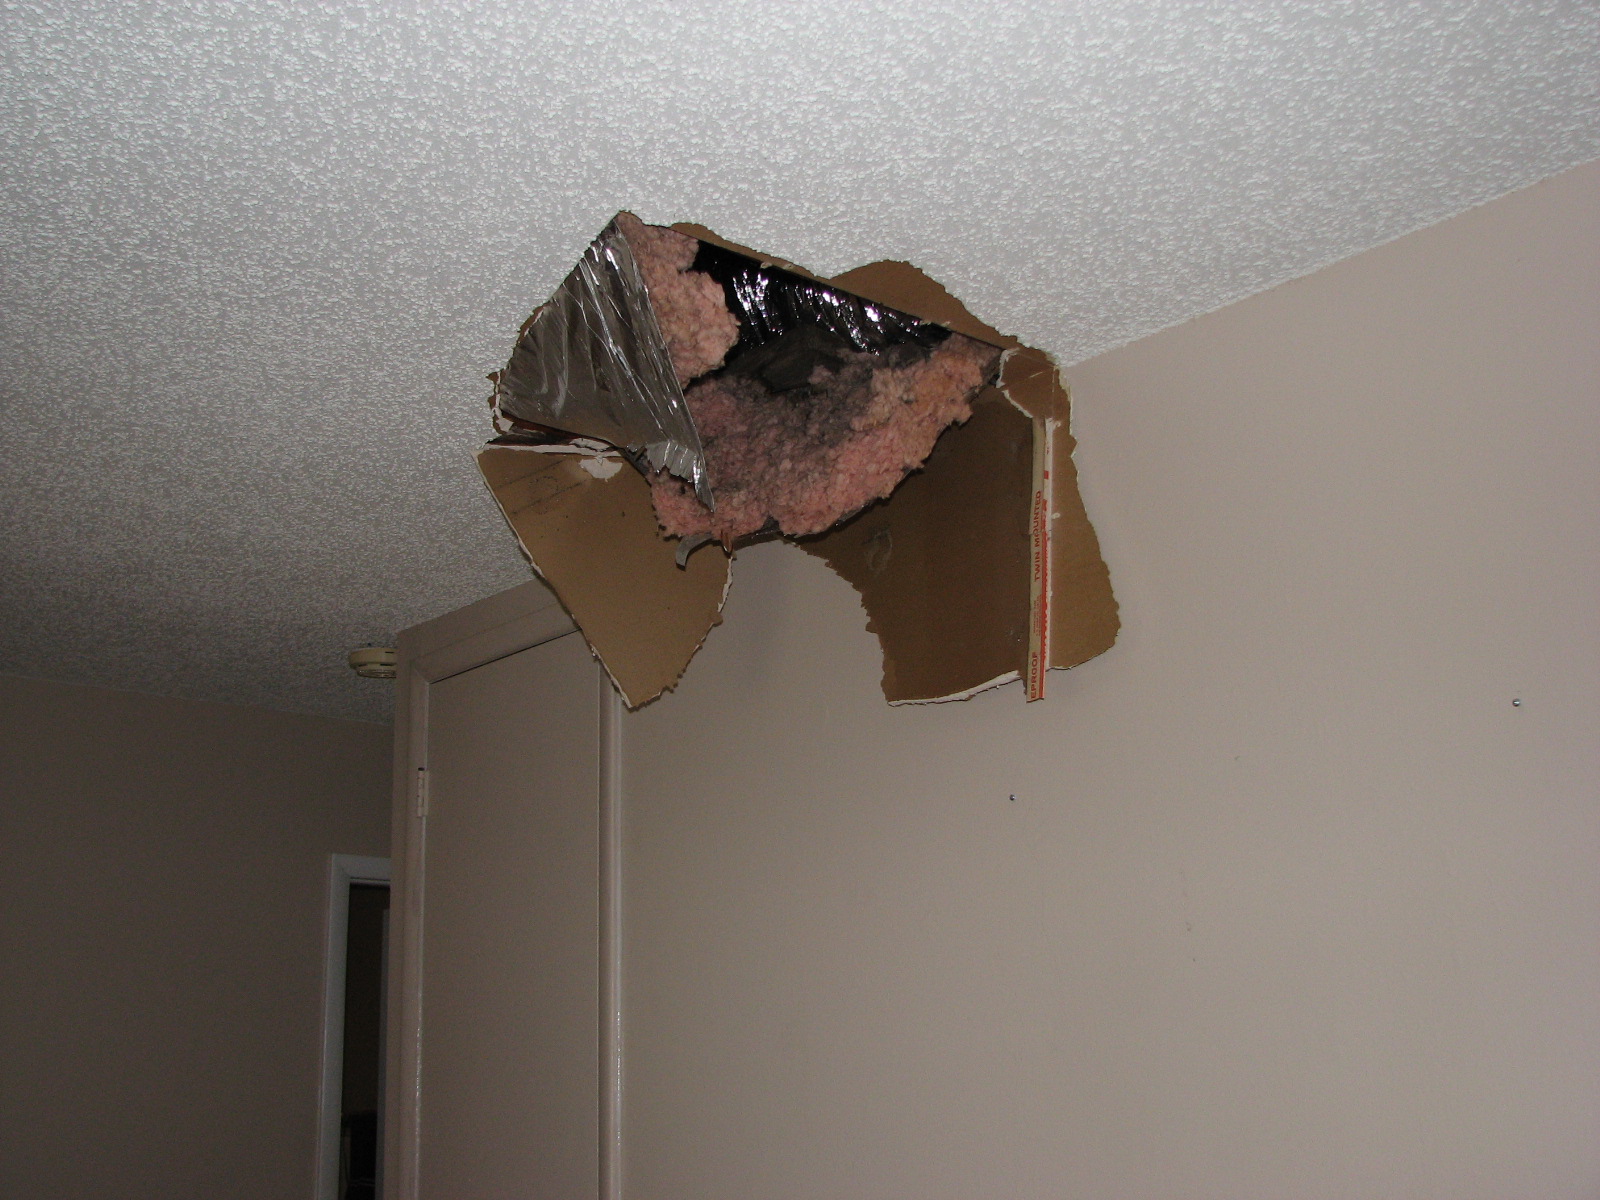 Patch Drywall Ceiling Popcorn